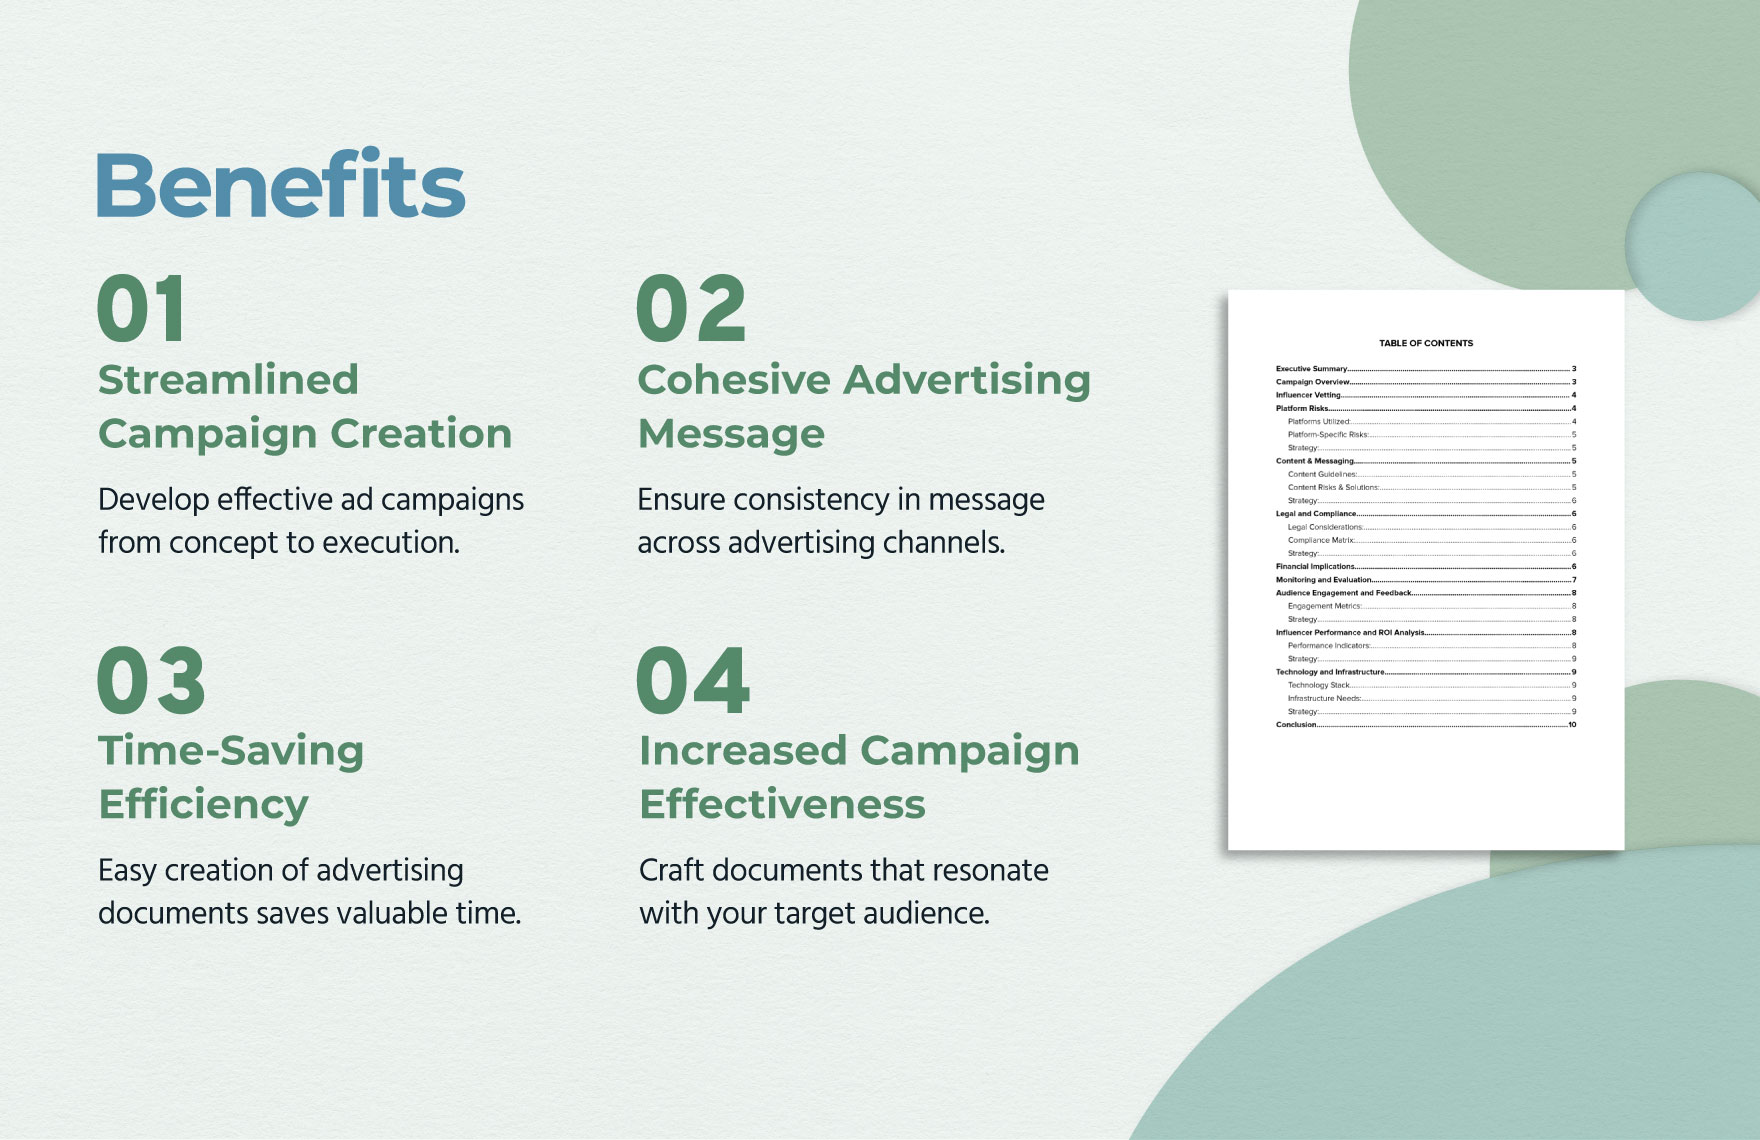 Influencer Campaign Risk Advertising Assessment Template